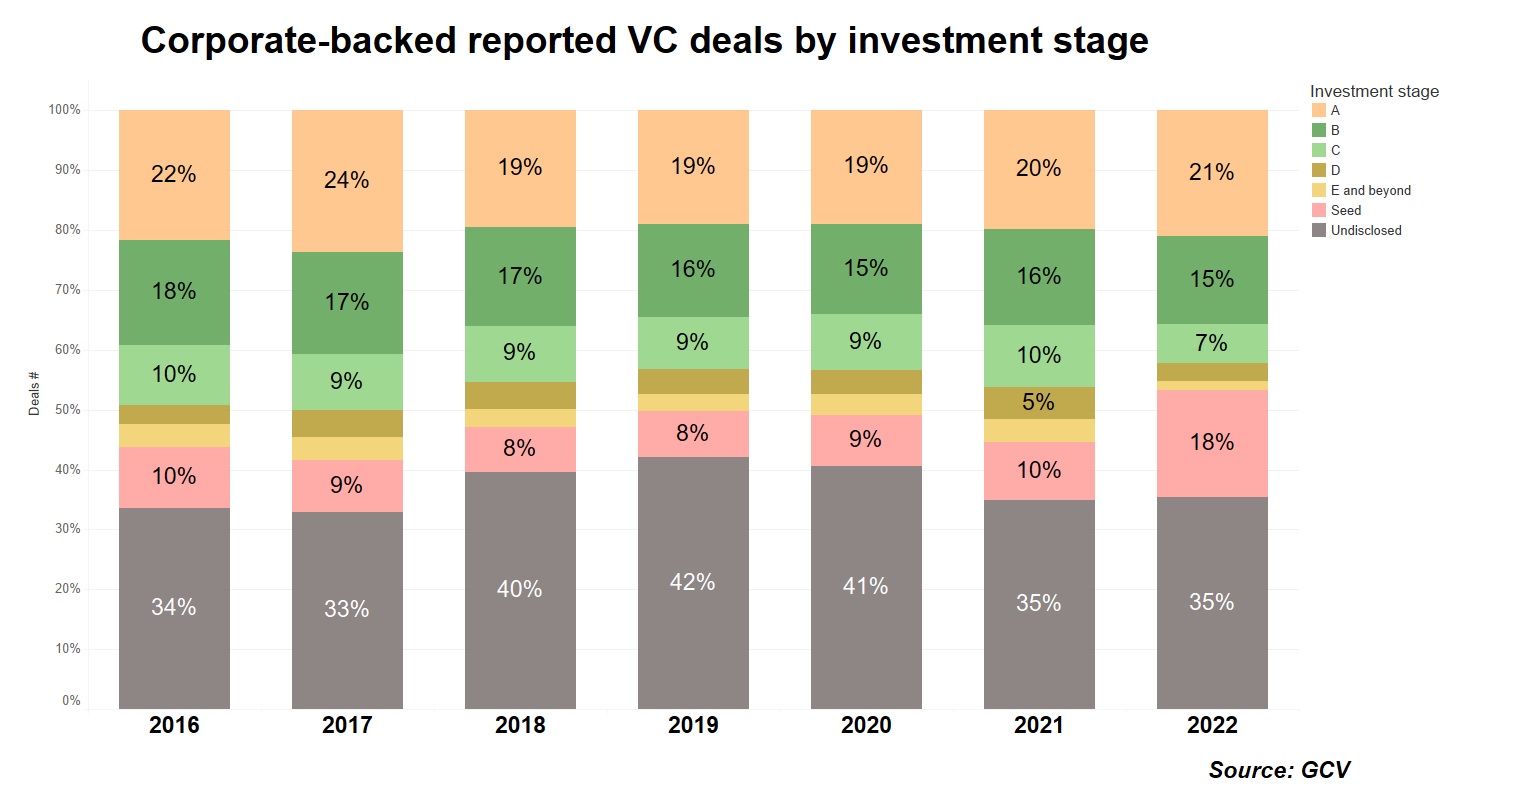 Bar chart showing investment stage as % of total of all deals by corporate Vc investors since 2016